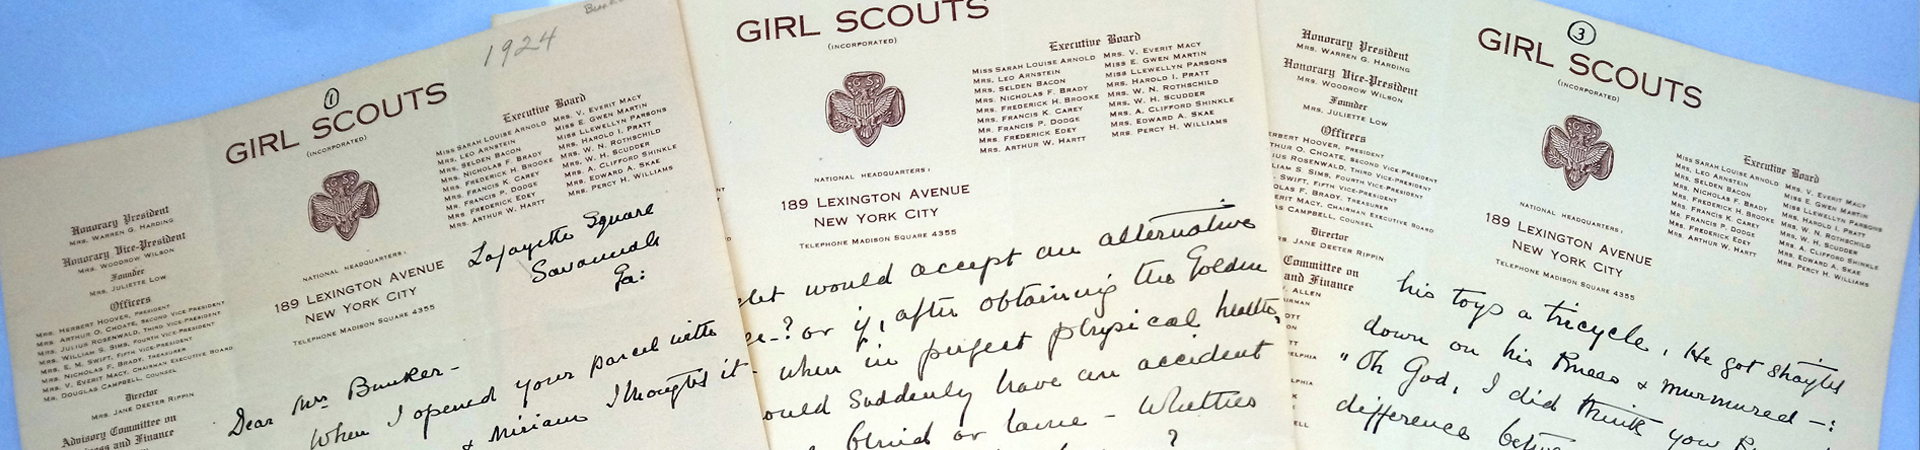  Girl Scout official documents 